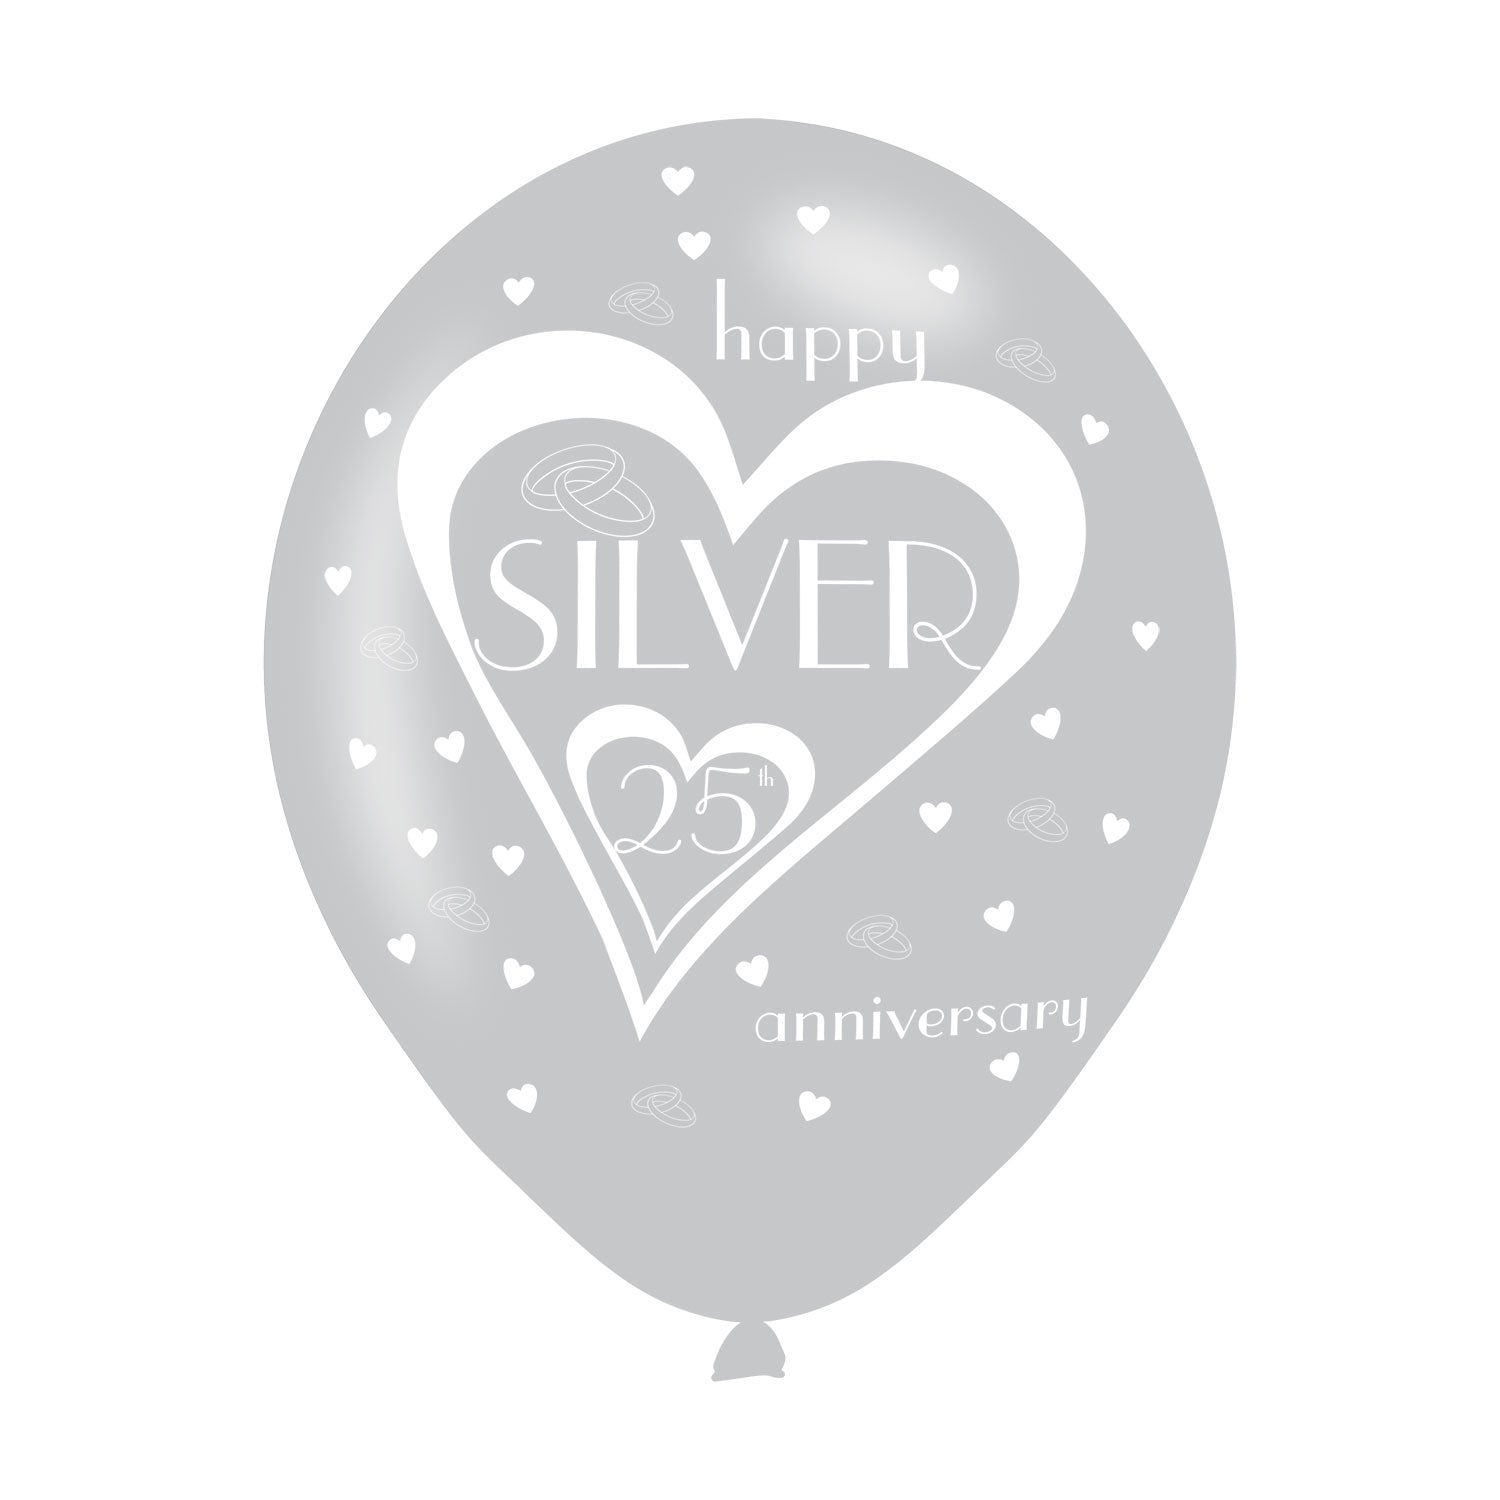 25th Silver Anniversary Latex Balloons. Will inflate up to 27cm. Suitable for Air fill or Helium fill.